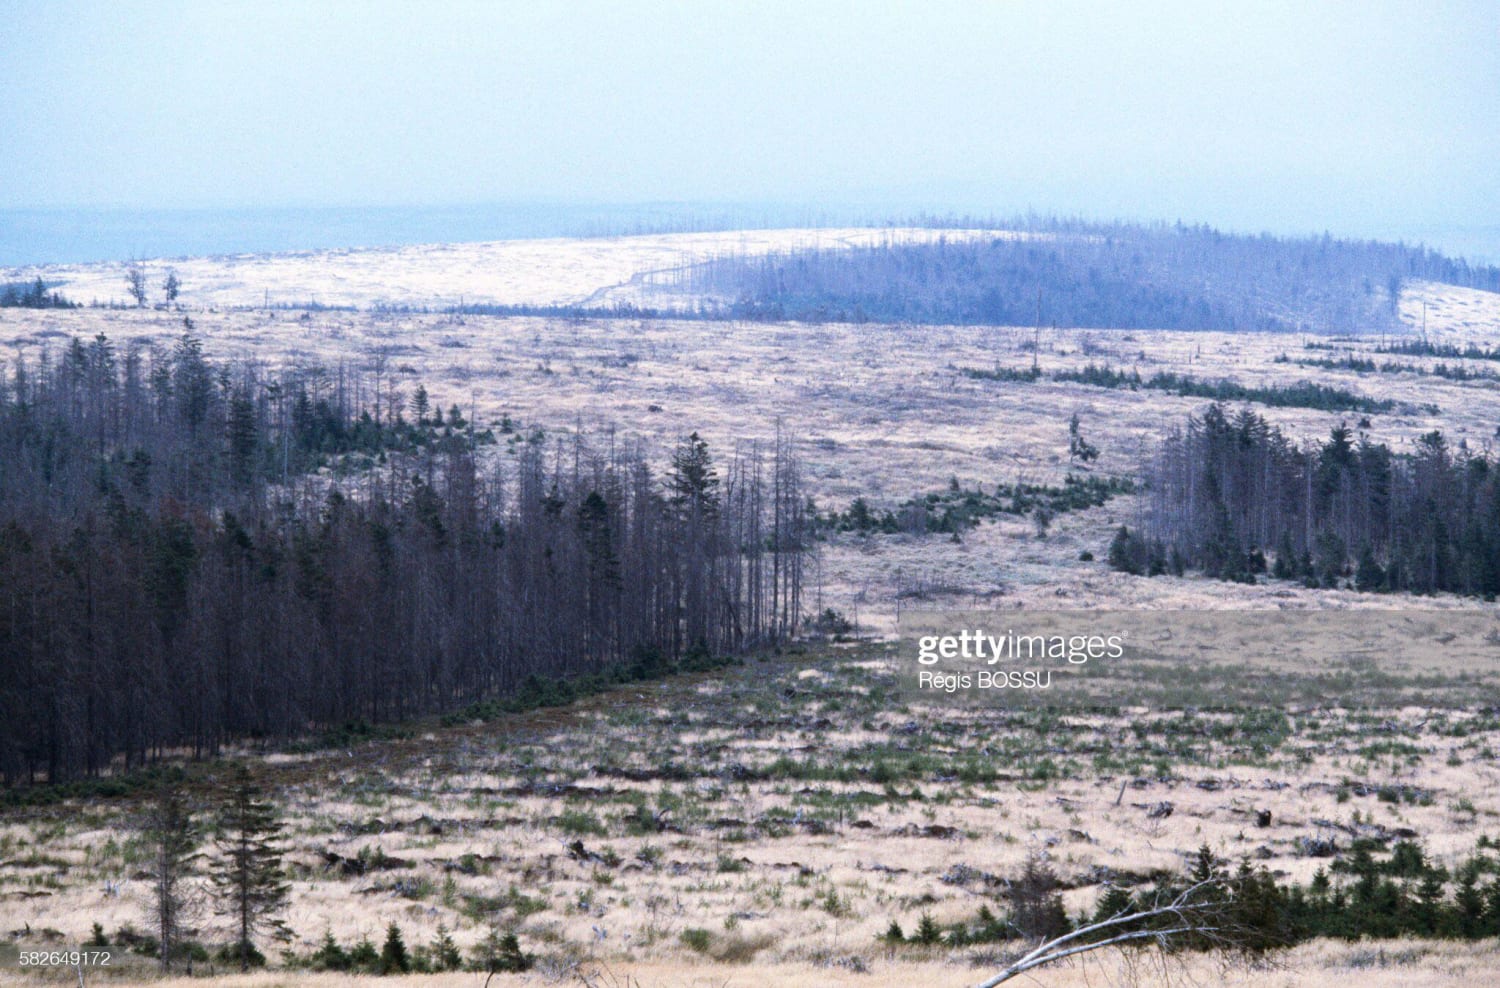 1983 Czechoslovakia: a patch of forest devastated by acid rain. Most of Soviet controlled Eastern Europe experienced profound ecological damage during their occupation due to a lack of environmental regulations and the belief that pollution was a “capitalist” problem. [2,,349]